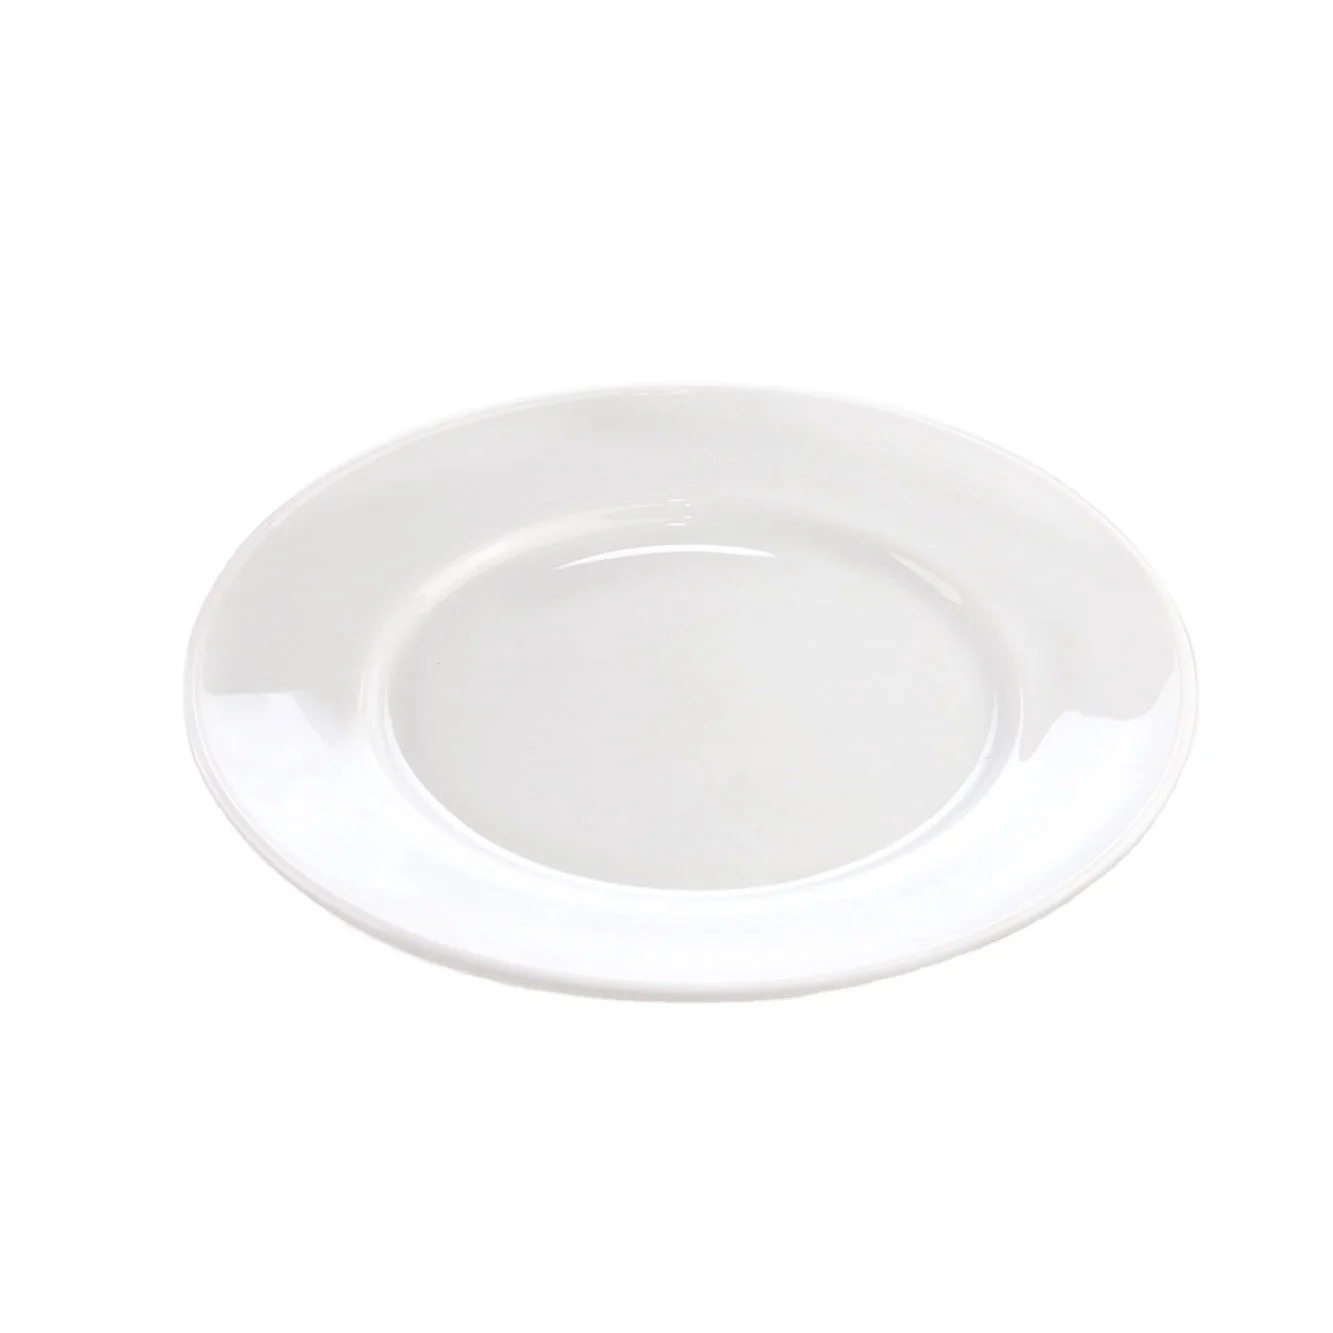 Simple and elegant White Frosted Edge Glass Serving Plate Silver Rim Charger Dishes